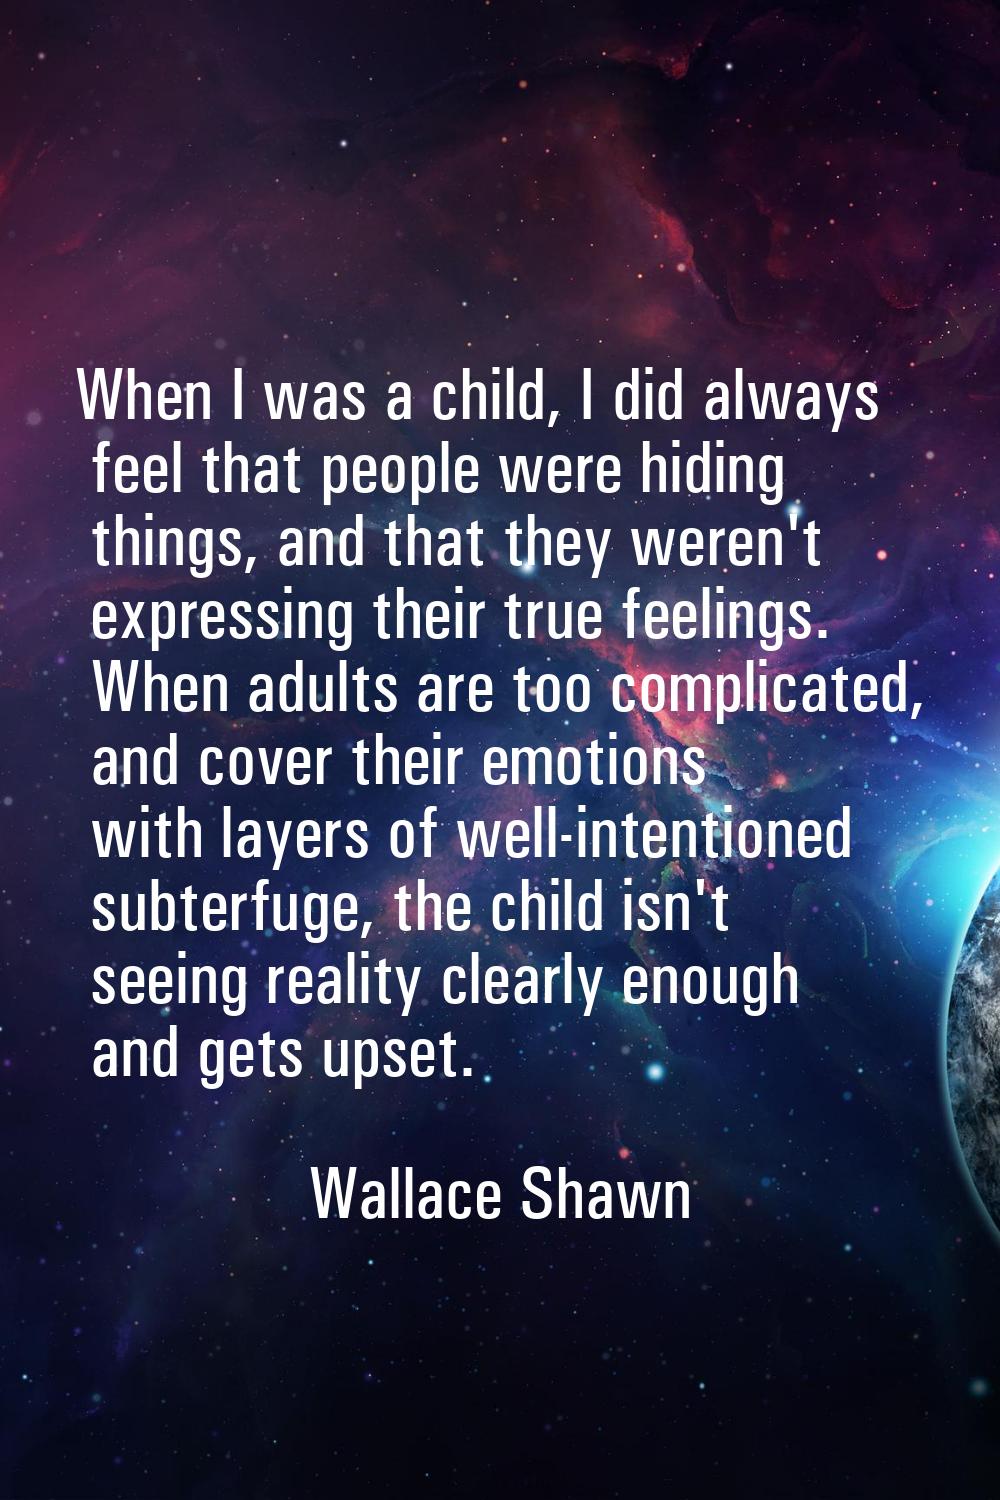 When I was a child, I did always feel that people were hiding things, and that they weren't express